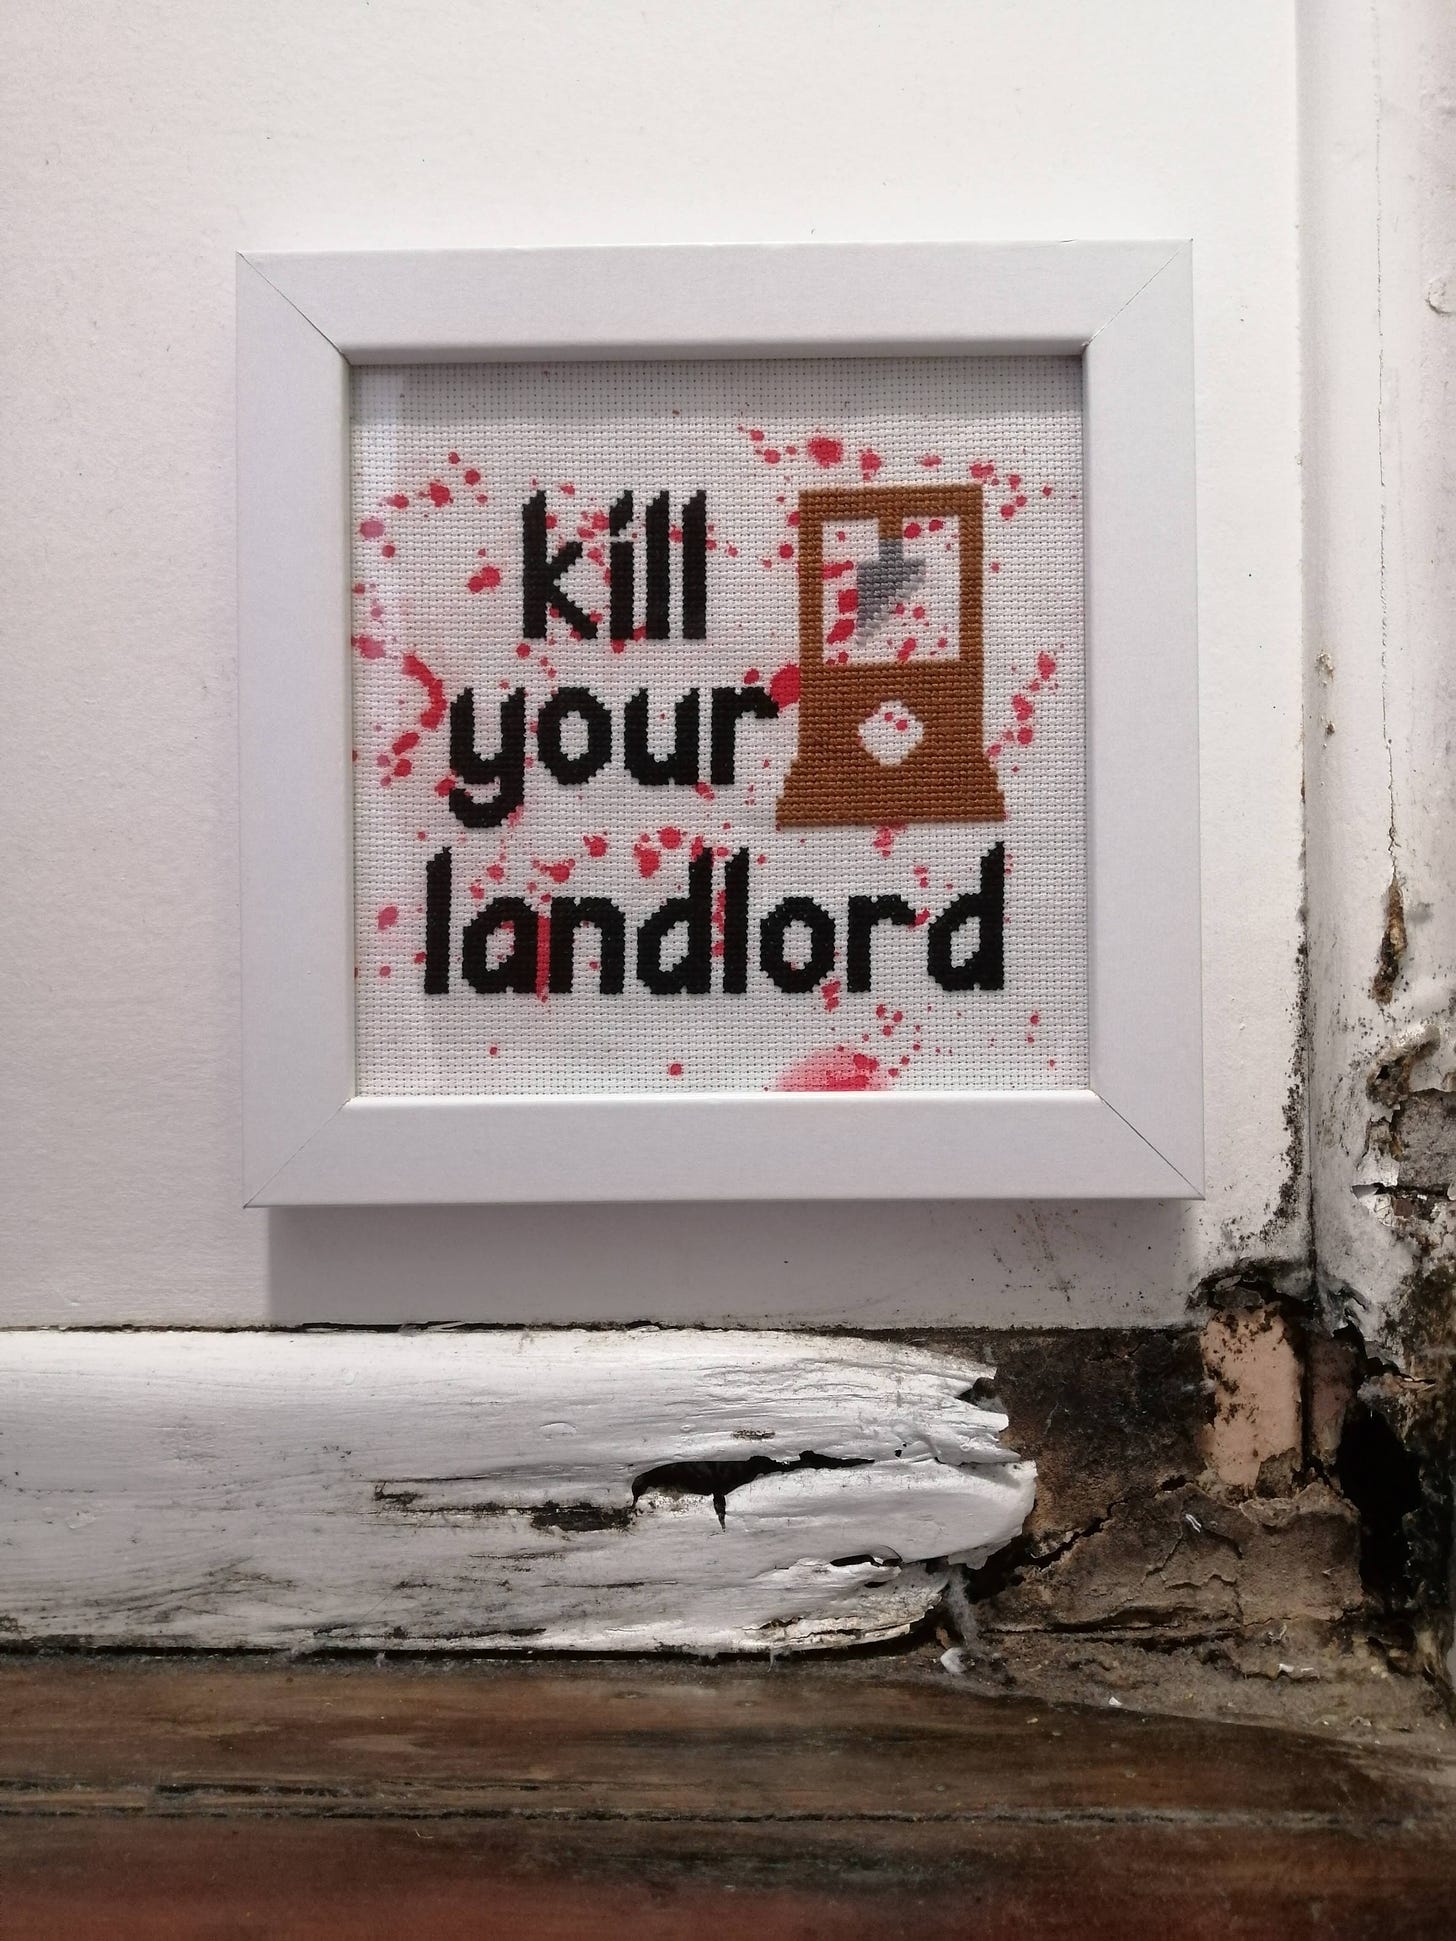 Cross stitch says "kill your landlord" on a red splattered fabric with a picture of a guillotine. The frame is in a mouldy rotting corner of a house